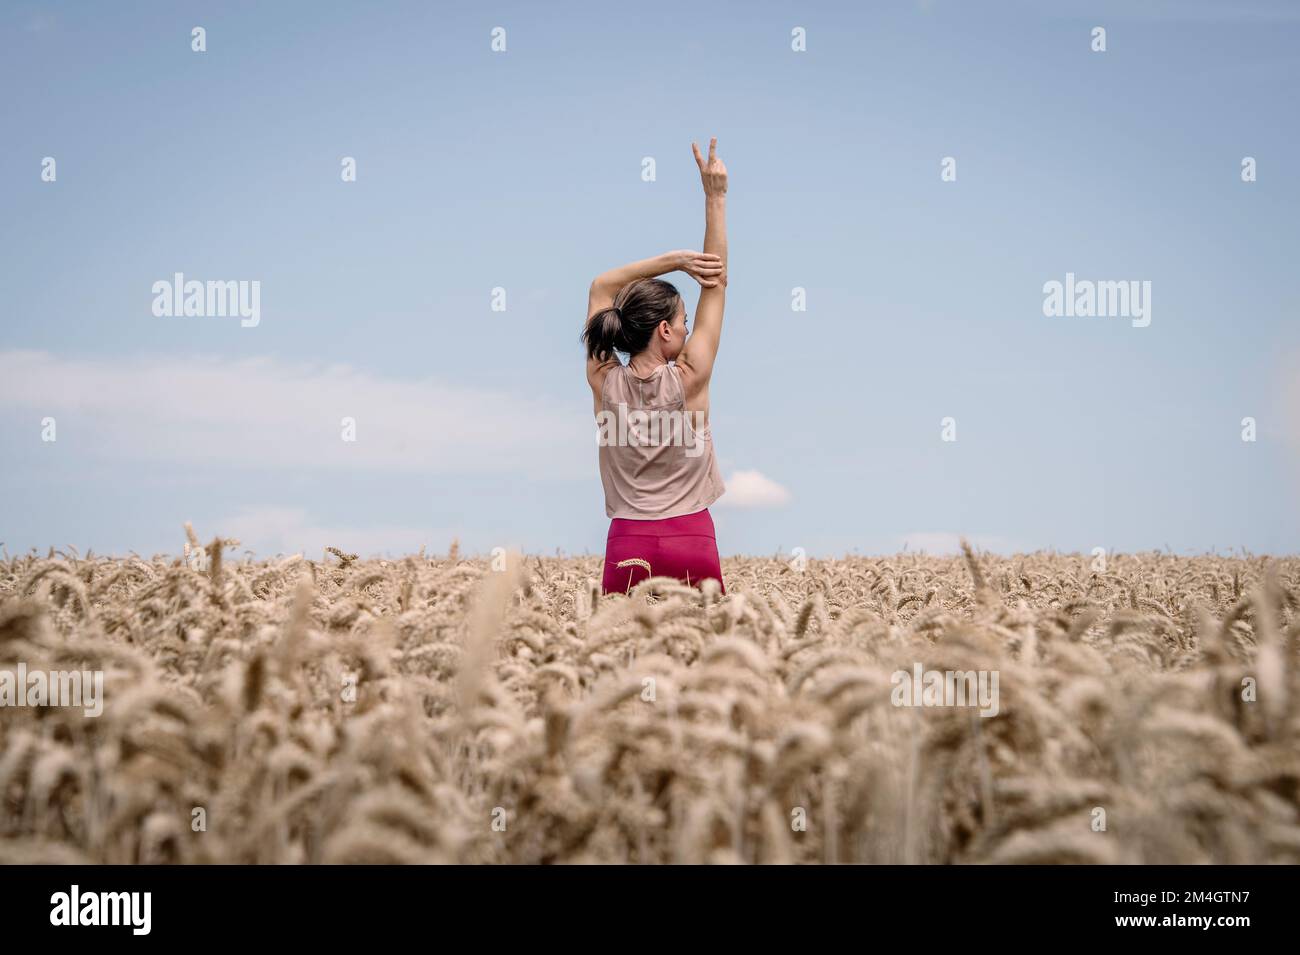 Rear view of a woman with her arms raised with a V sign. Getting away from it all concept. Stock Photo